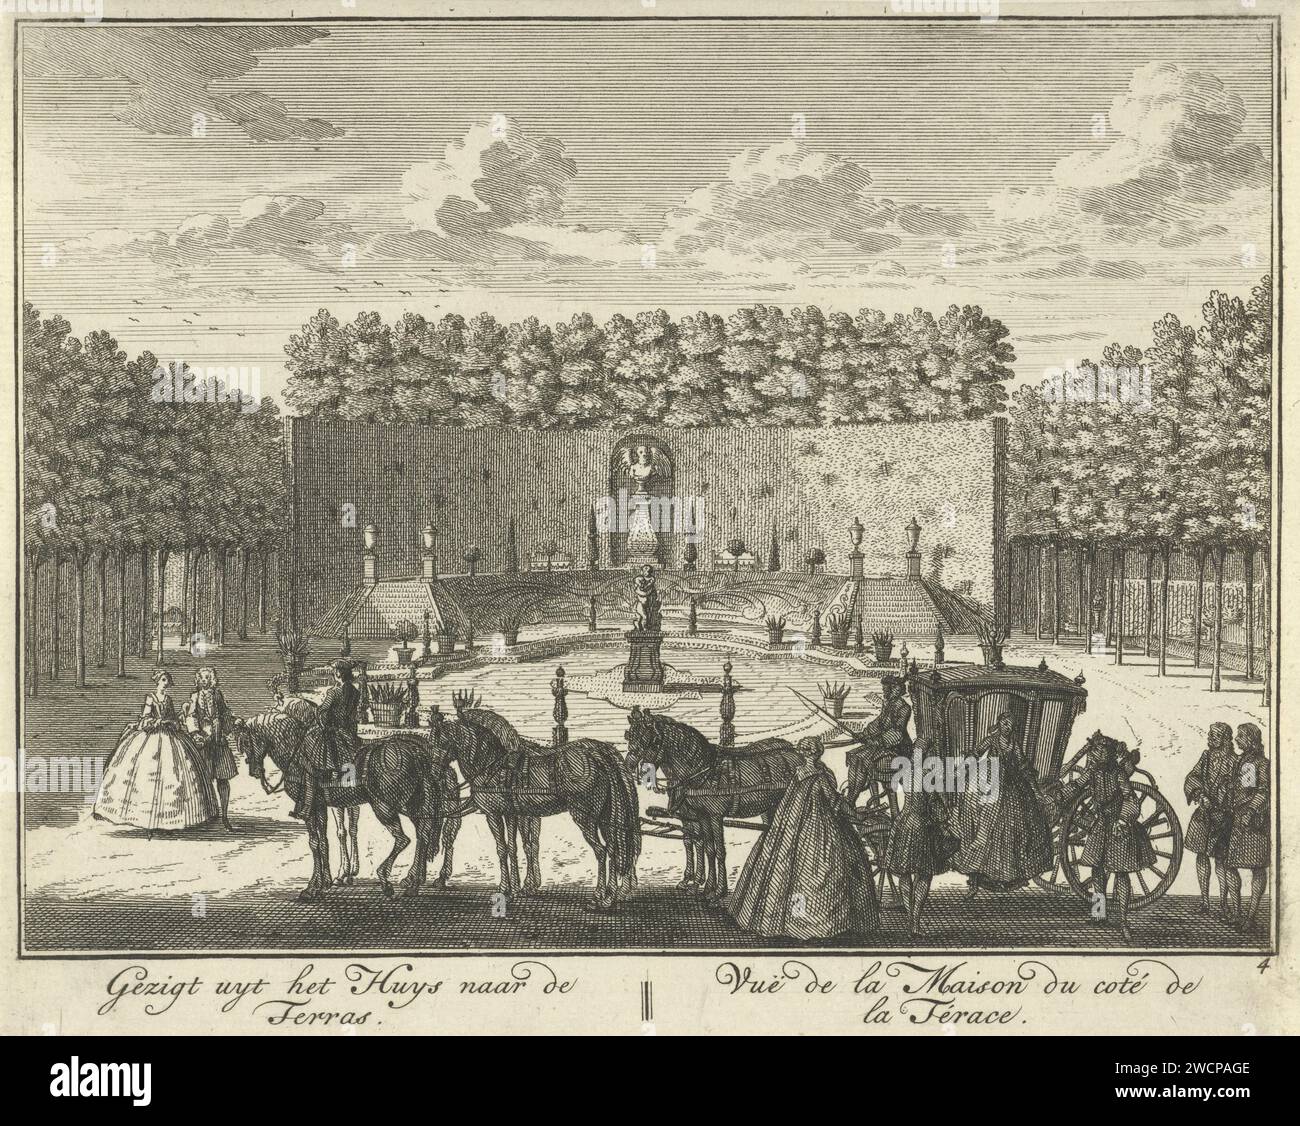 Terrace in the garden of Huis ter Meer in Maarssen, Hendrik de Leth, c. 1740 print View of the terrace in the French garden of Huis ter Meer in Maarssen. In the foreground is a carriage with six horses, figures watch all around. The print is part of a series with 26 faces at Huis ter Meer and the accompanying estate in Maarssen.  paper etching country-house. French or architectonic garden; formal garden House Ter Meer Stock Photo